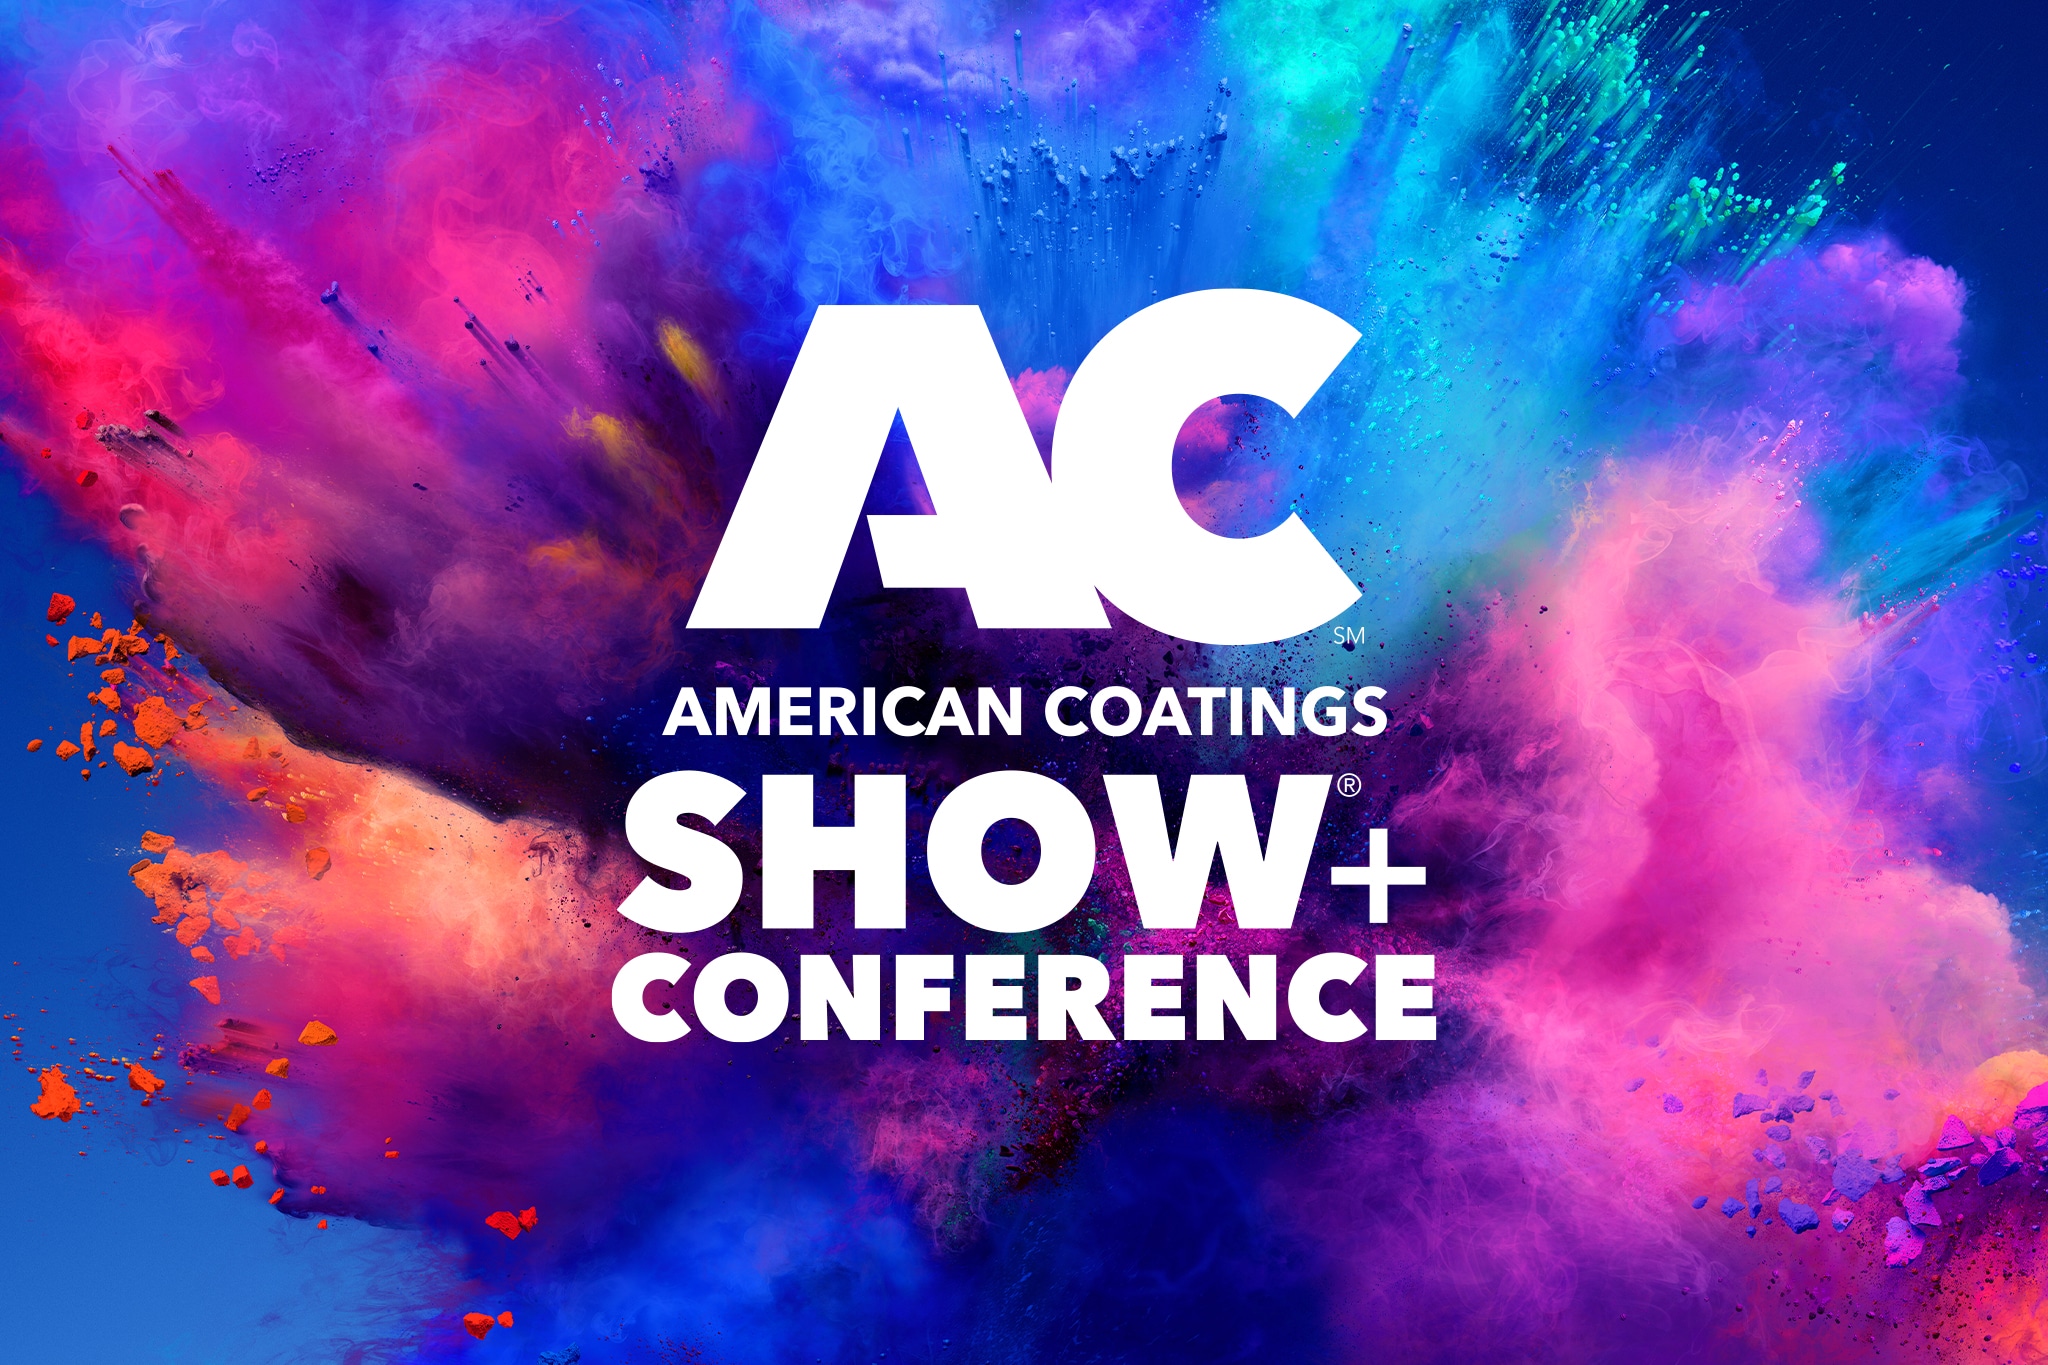 American Coatings Show + Conference